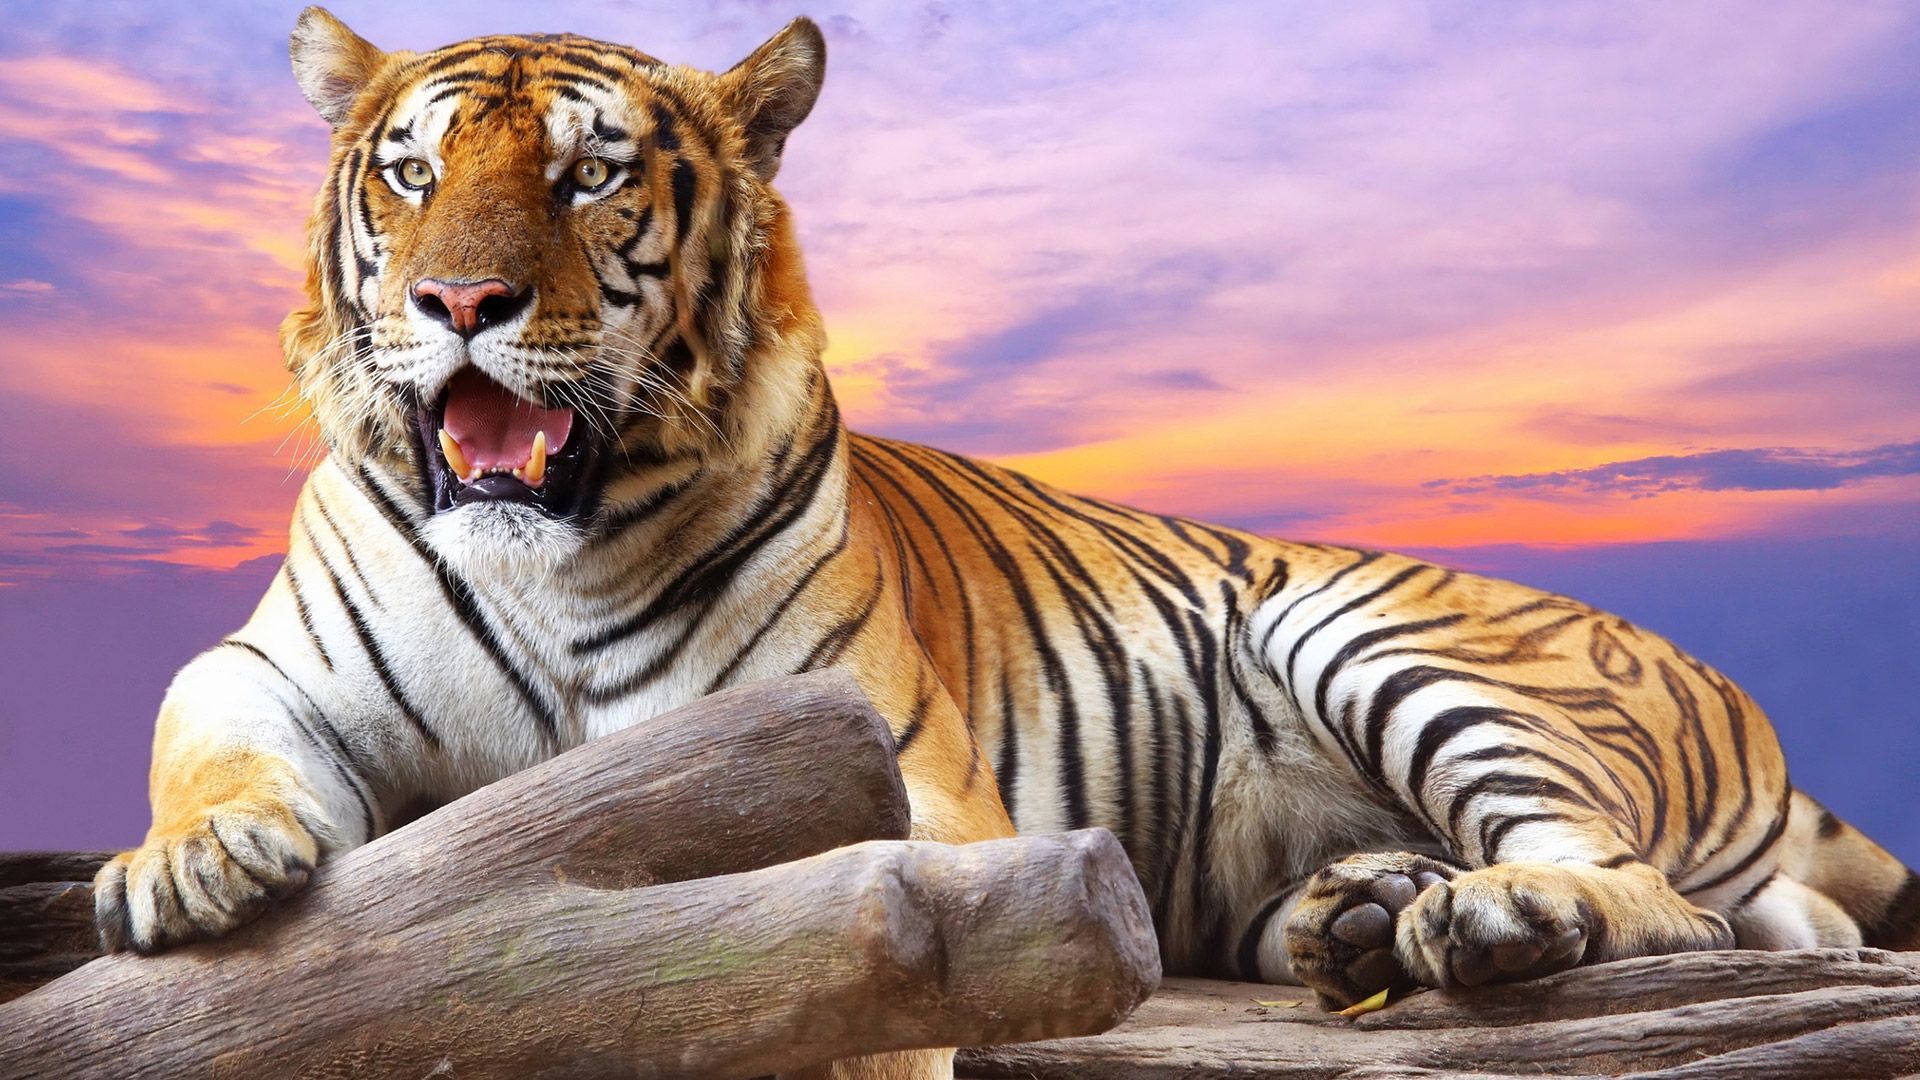 Wild Tiger in mood wallpapers – Free full hd wallpapers for 1080p ...